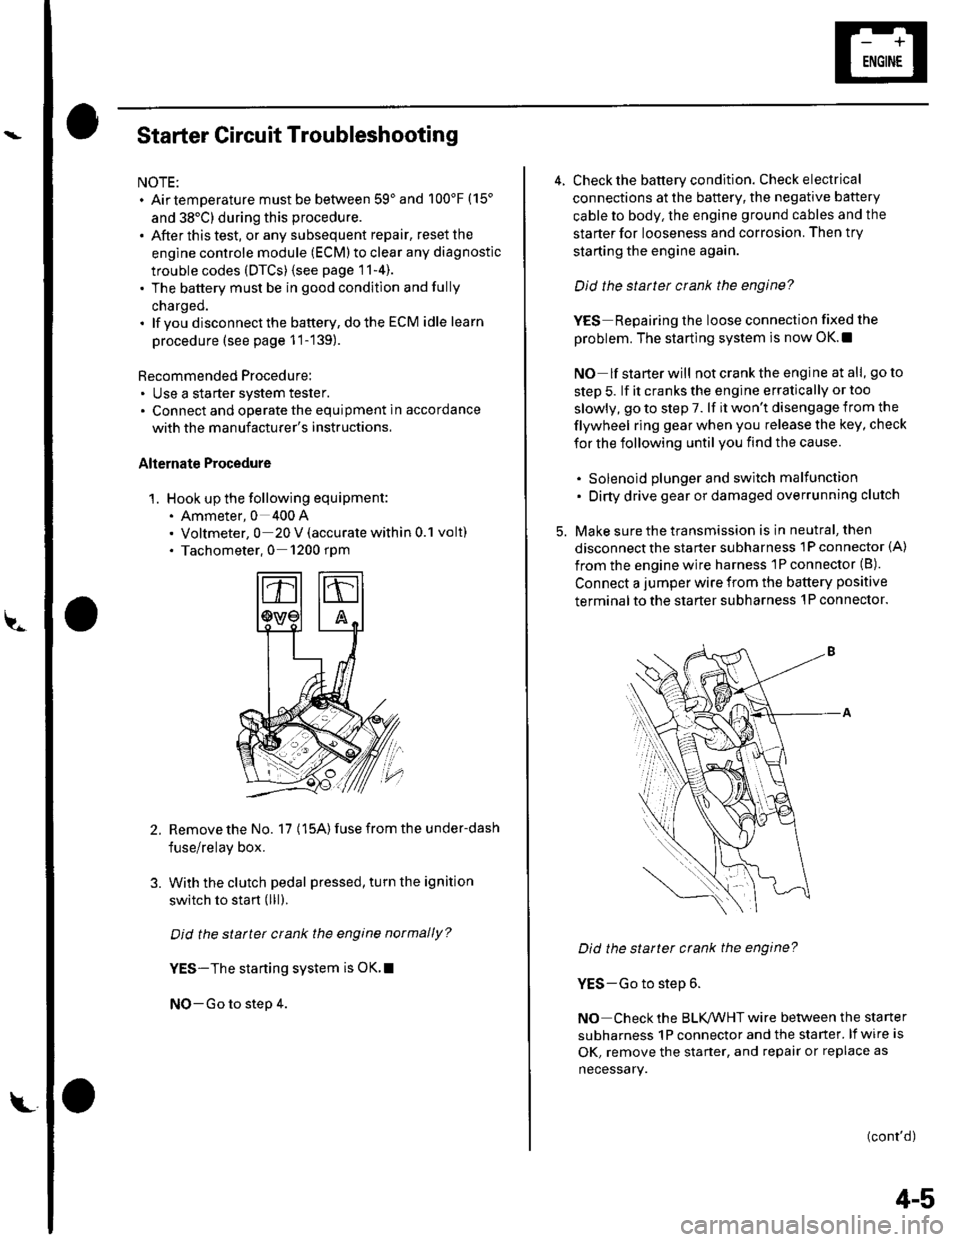 HONDA CIVIC 2003 7.G Workshop Manual Starter Circuit Troubleshooting
NOTE:. Airtemperature must be between 59and 100F (15
and 38C) during this procedure.
. After this test, or any subsequent repair, reset the
engine controle module (